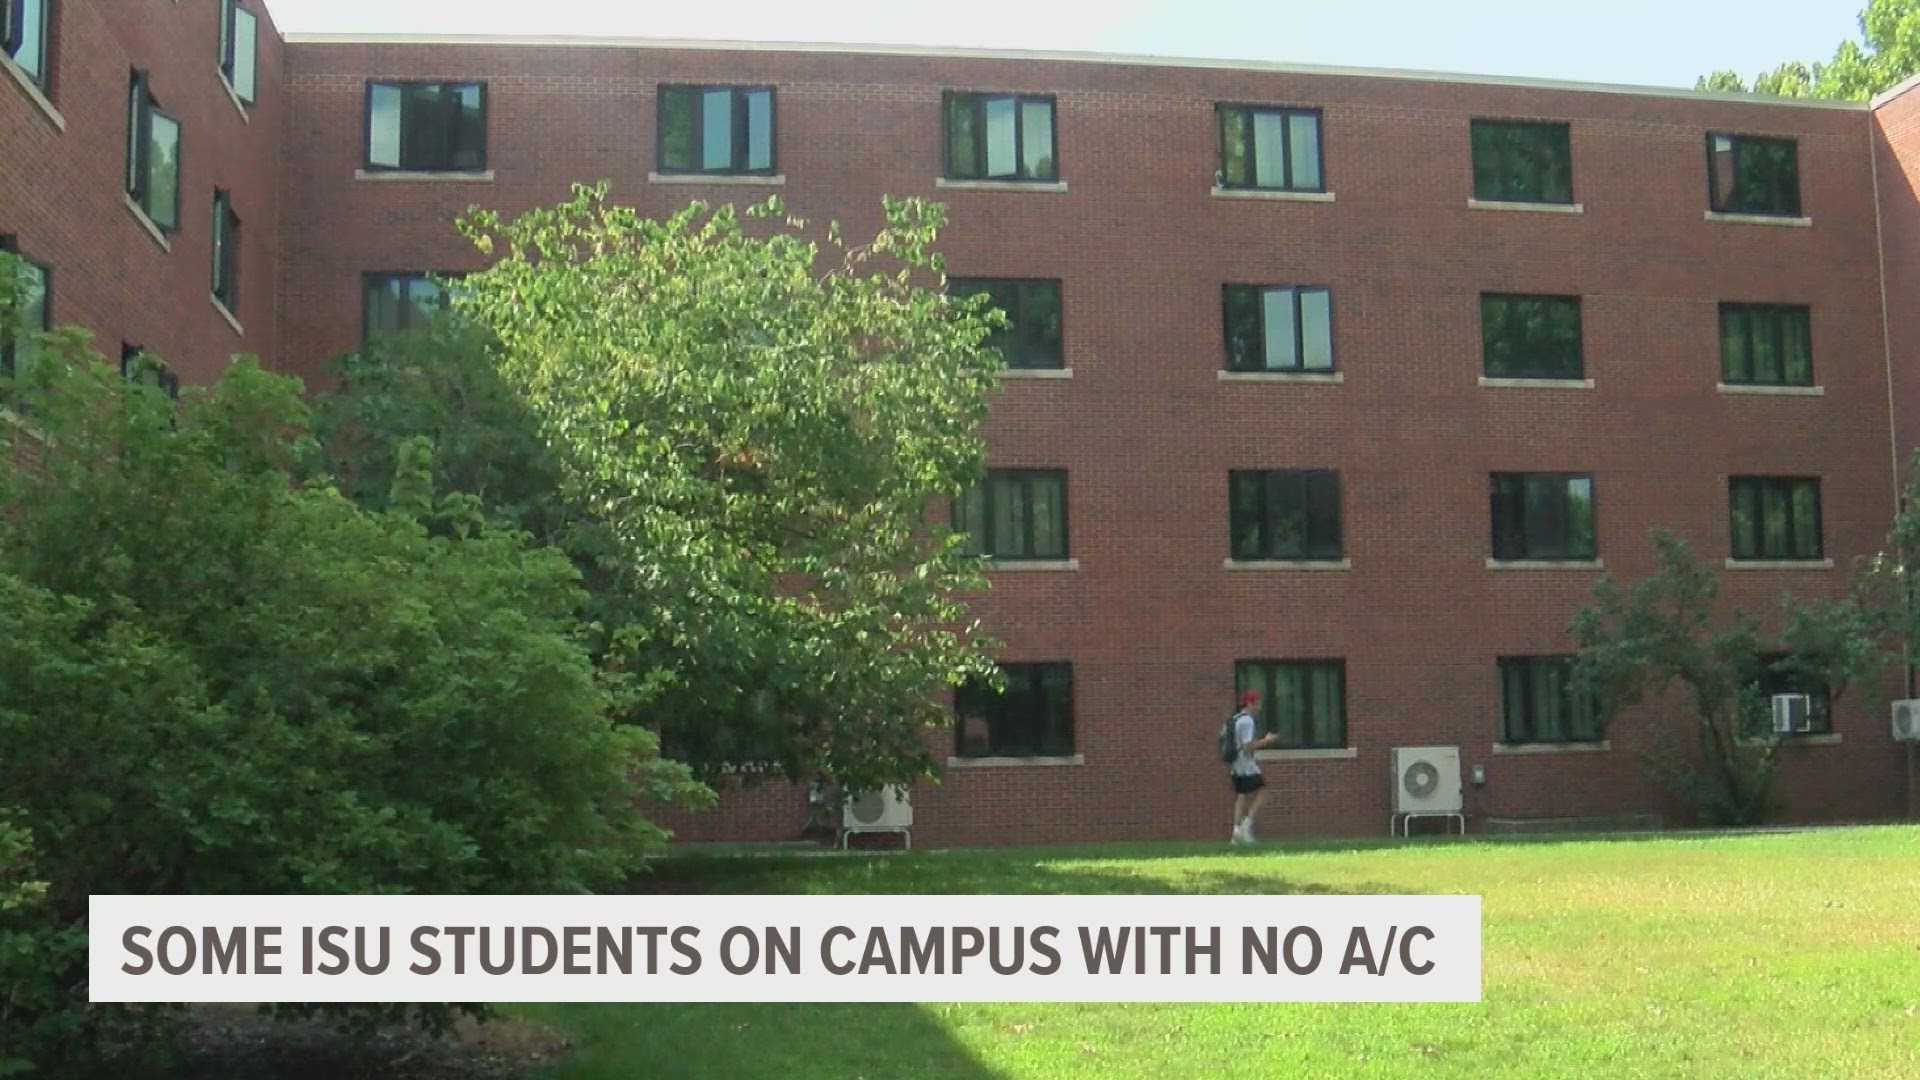 With summer heat and humidity in full force outside, some students at Iowa State University are making do without air conditioning in their dorm rooms.